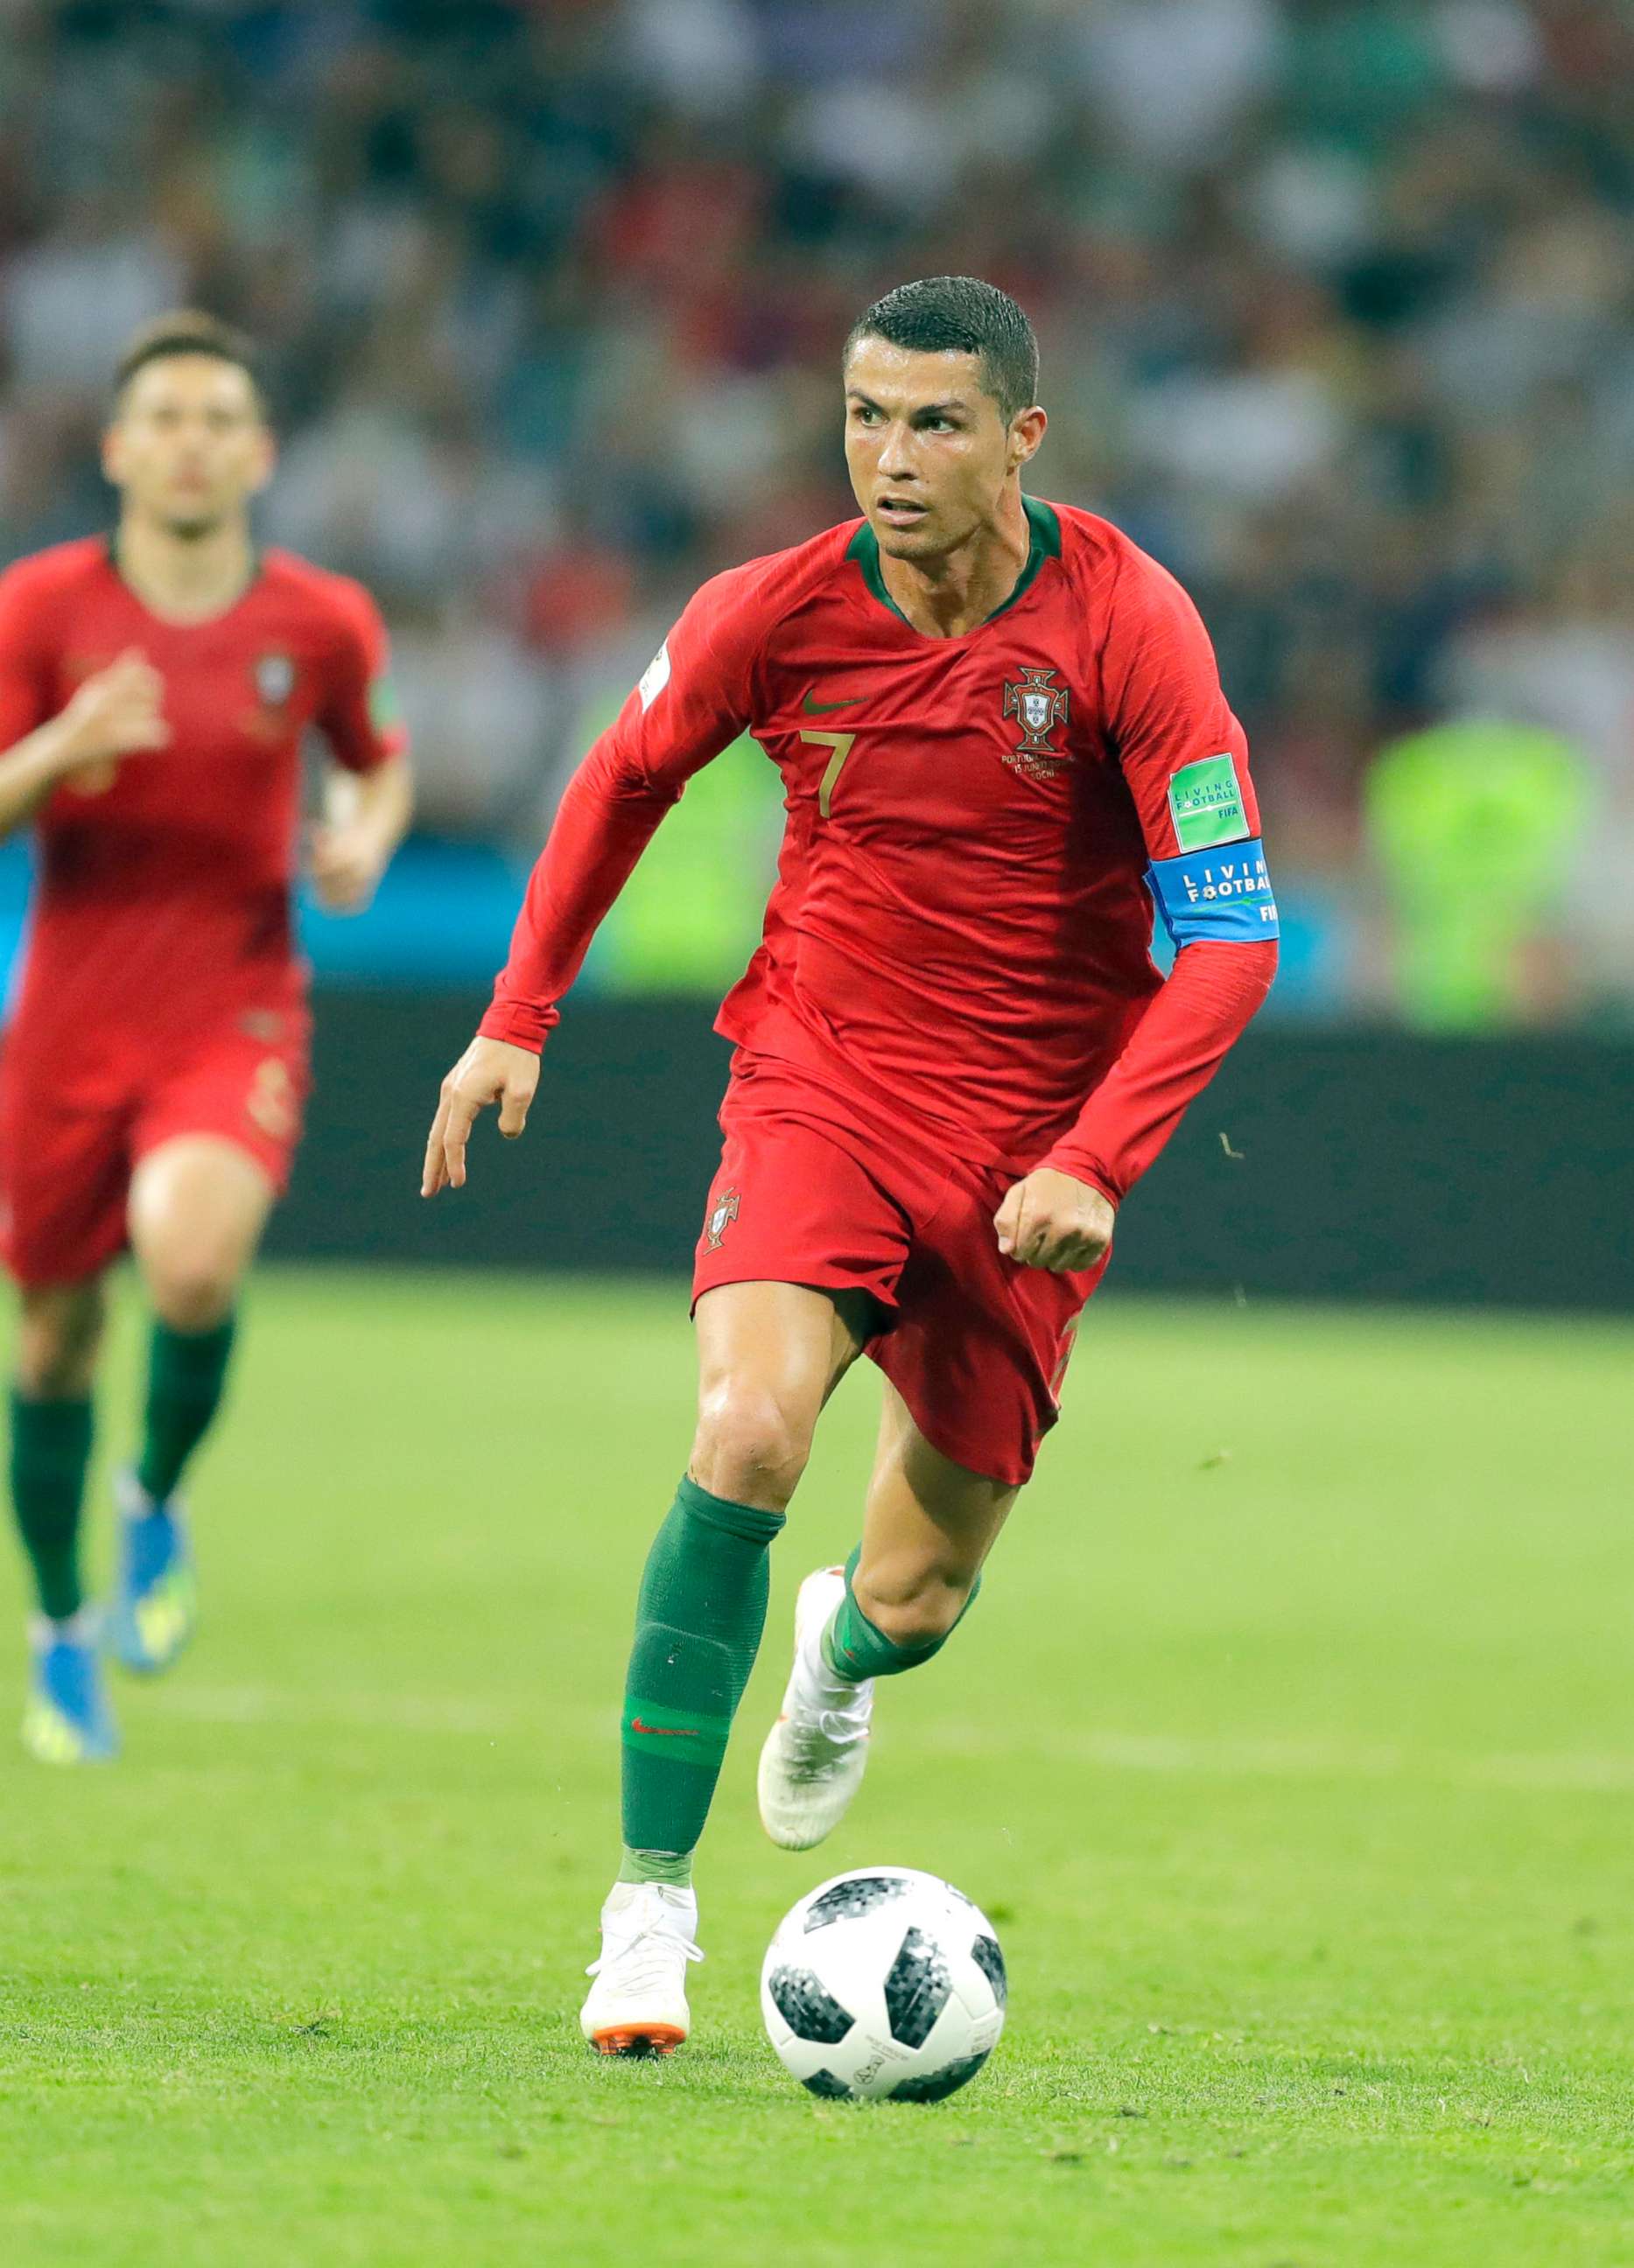 PHOTO: Portugal's Cristiano Ronaldo controls the ball during the group B match between Portugal and Spain at the 2018 soccer World Cup in the Fisht Stadium in Sochi, Russia, June 15, 2018.